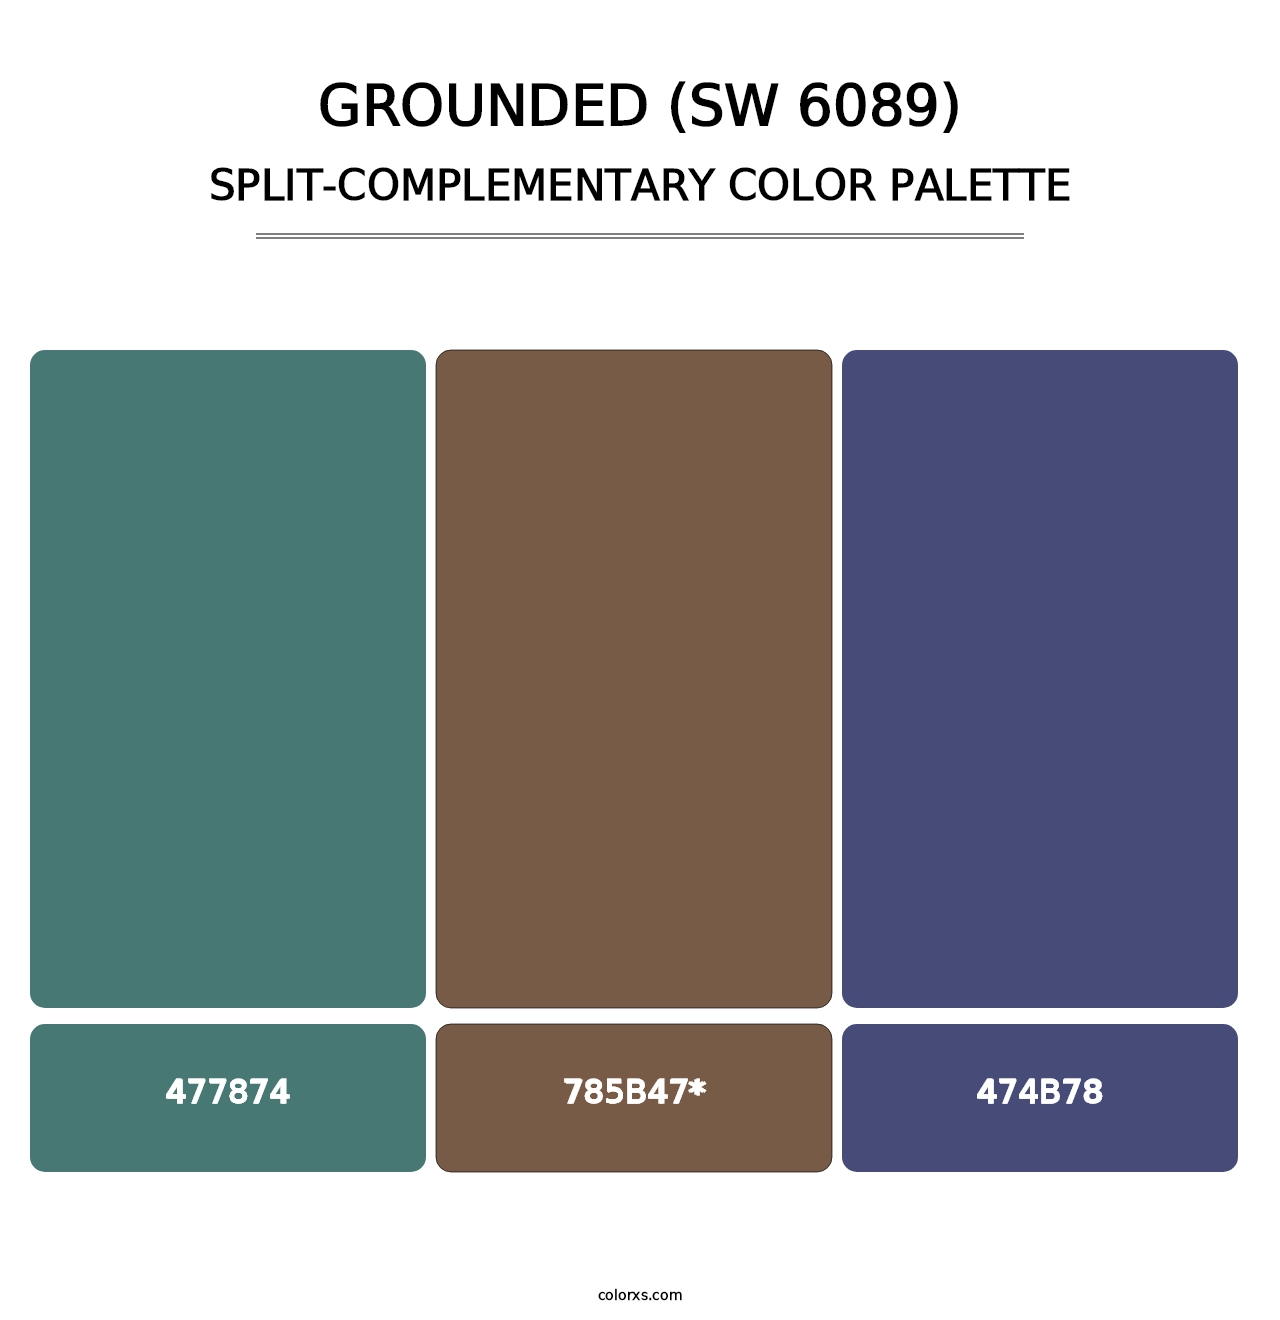 Grounded (SW 6089) - Split-Complementary Color Palette